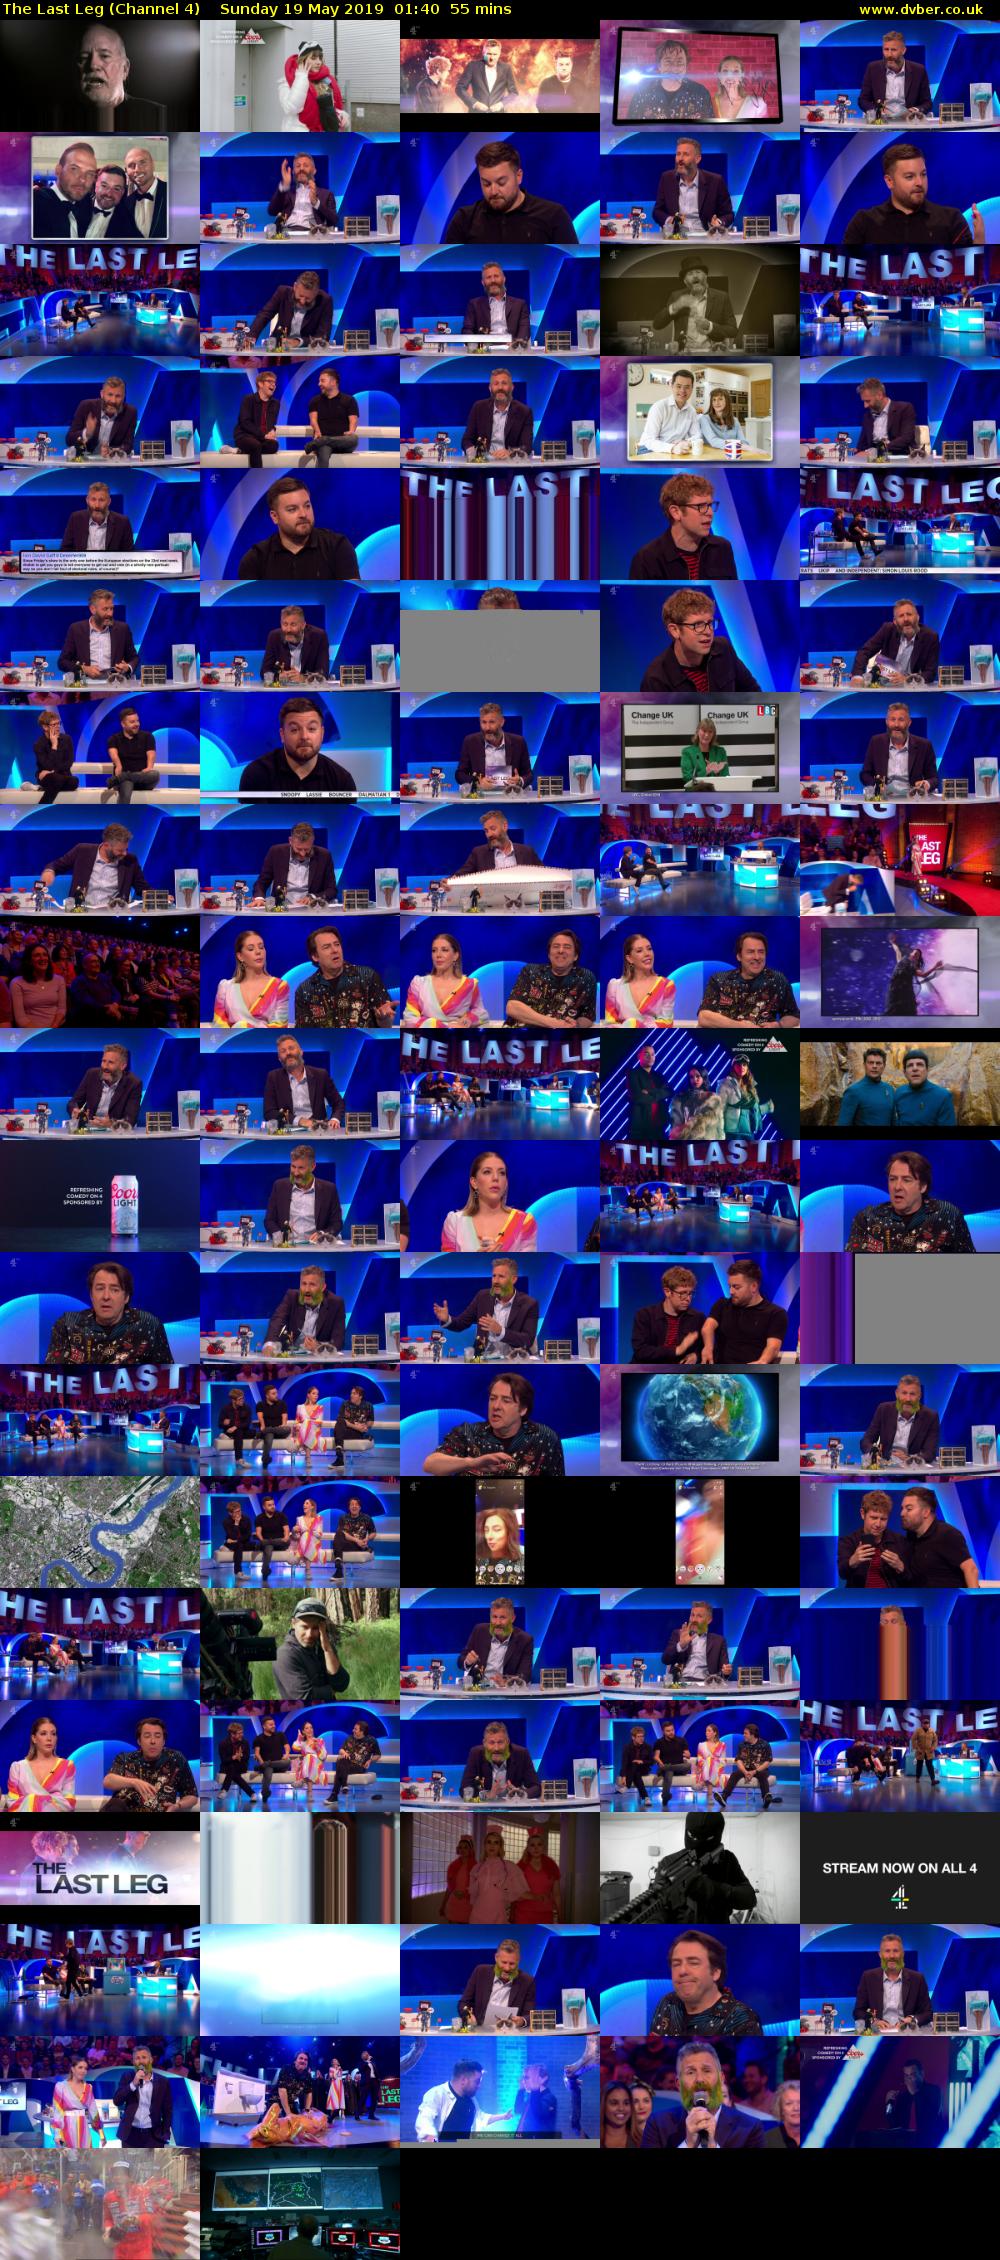 The Last Leg (Channel 4) Sunday 19 May 2019 01:40 - 02:35